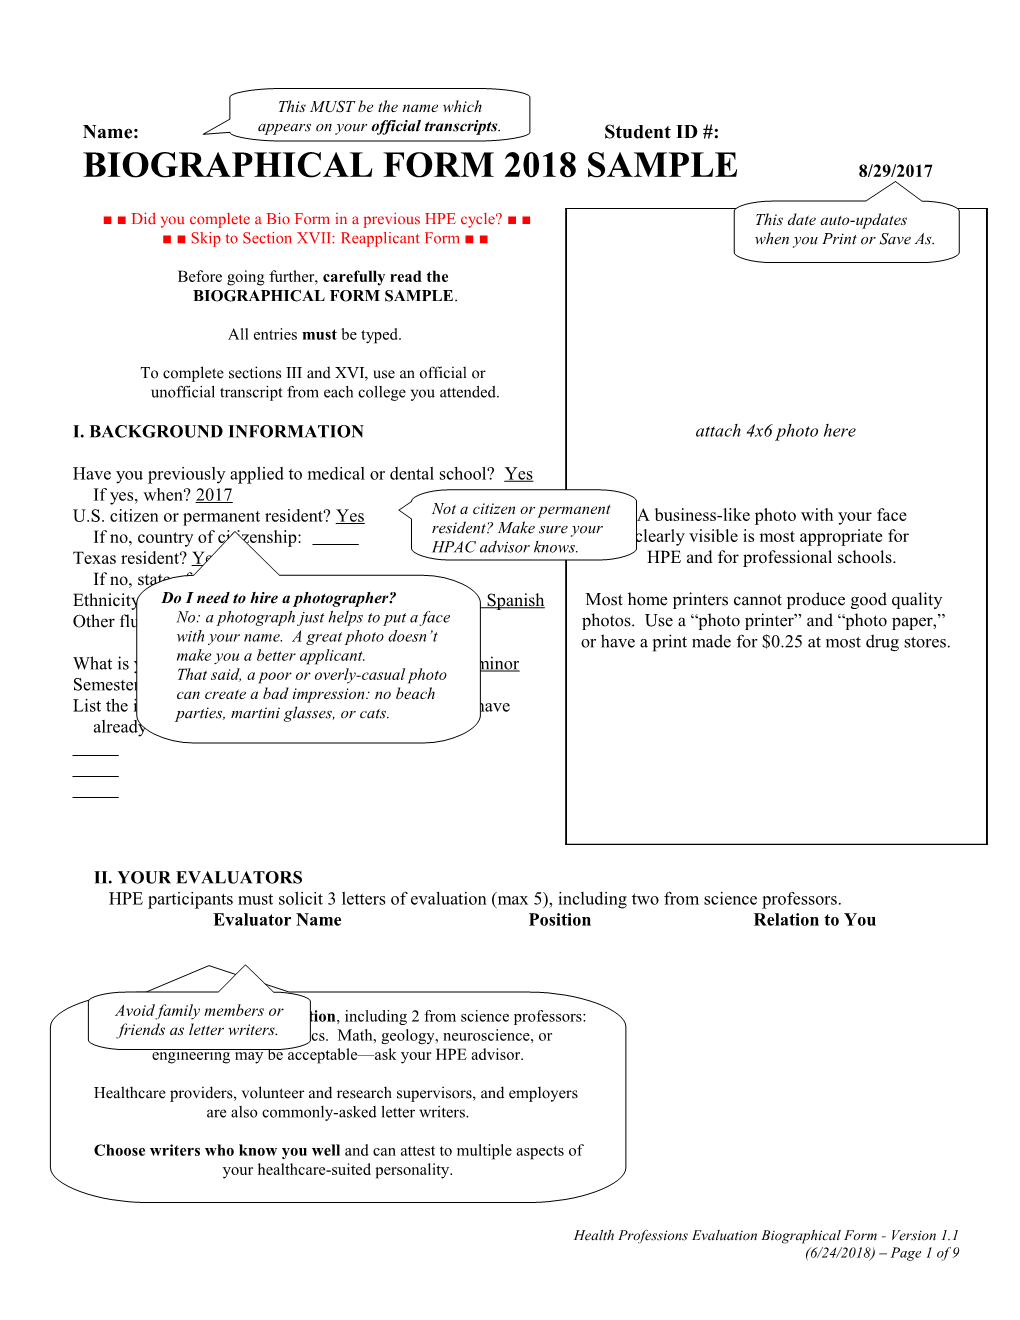 Health Professions Evaluation (Hpe) Biographic Data s1